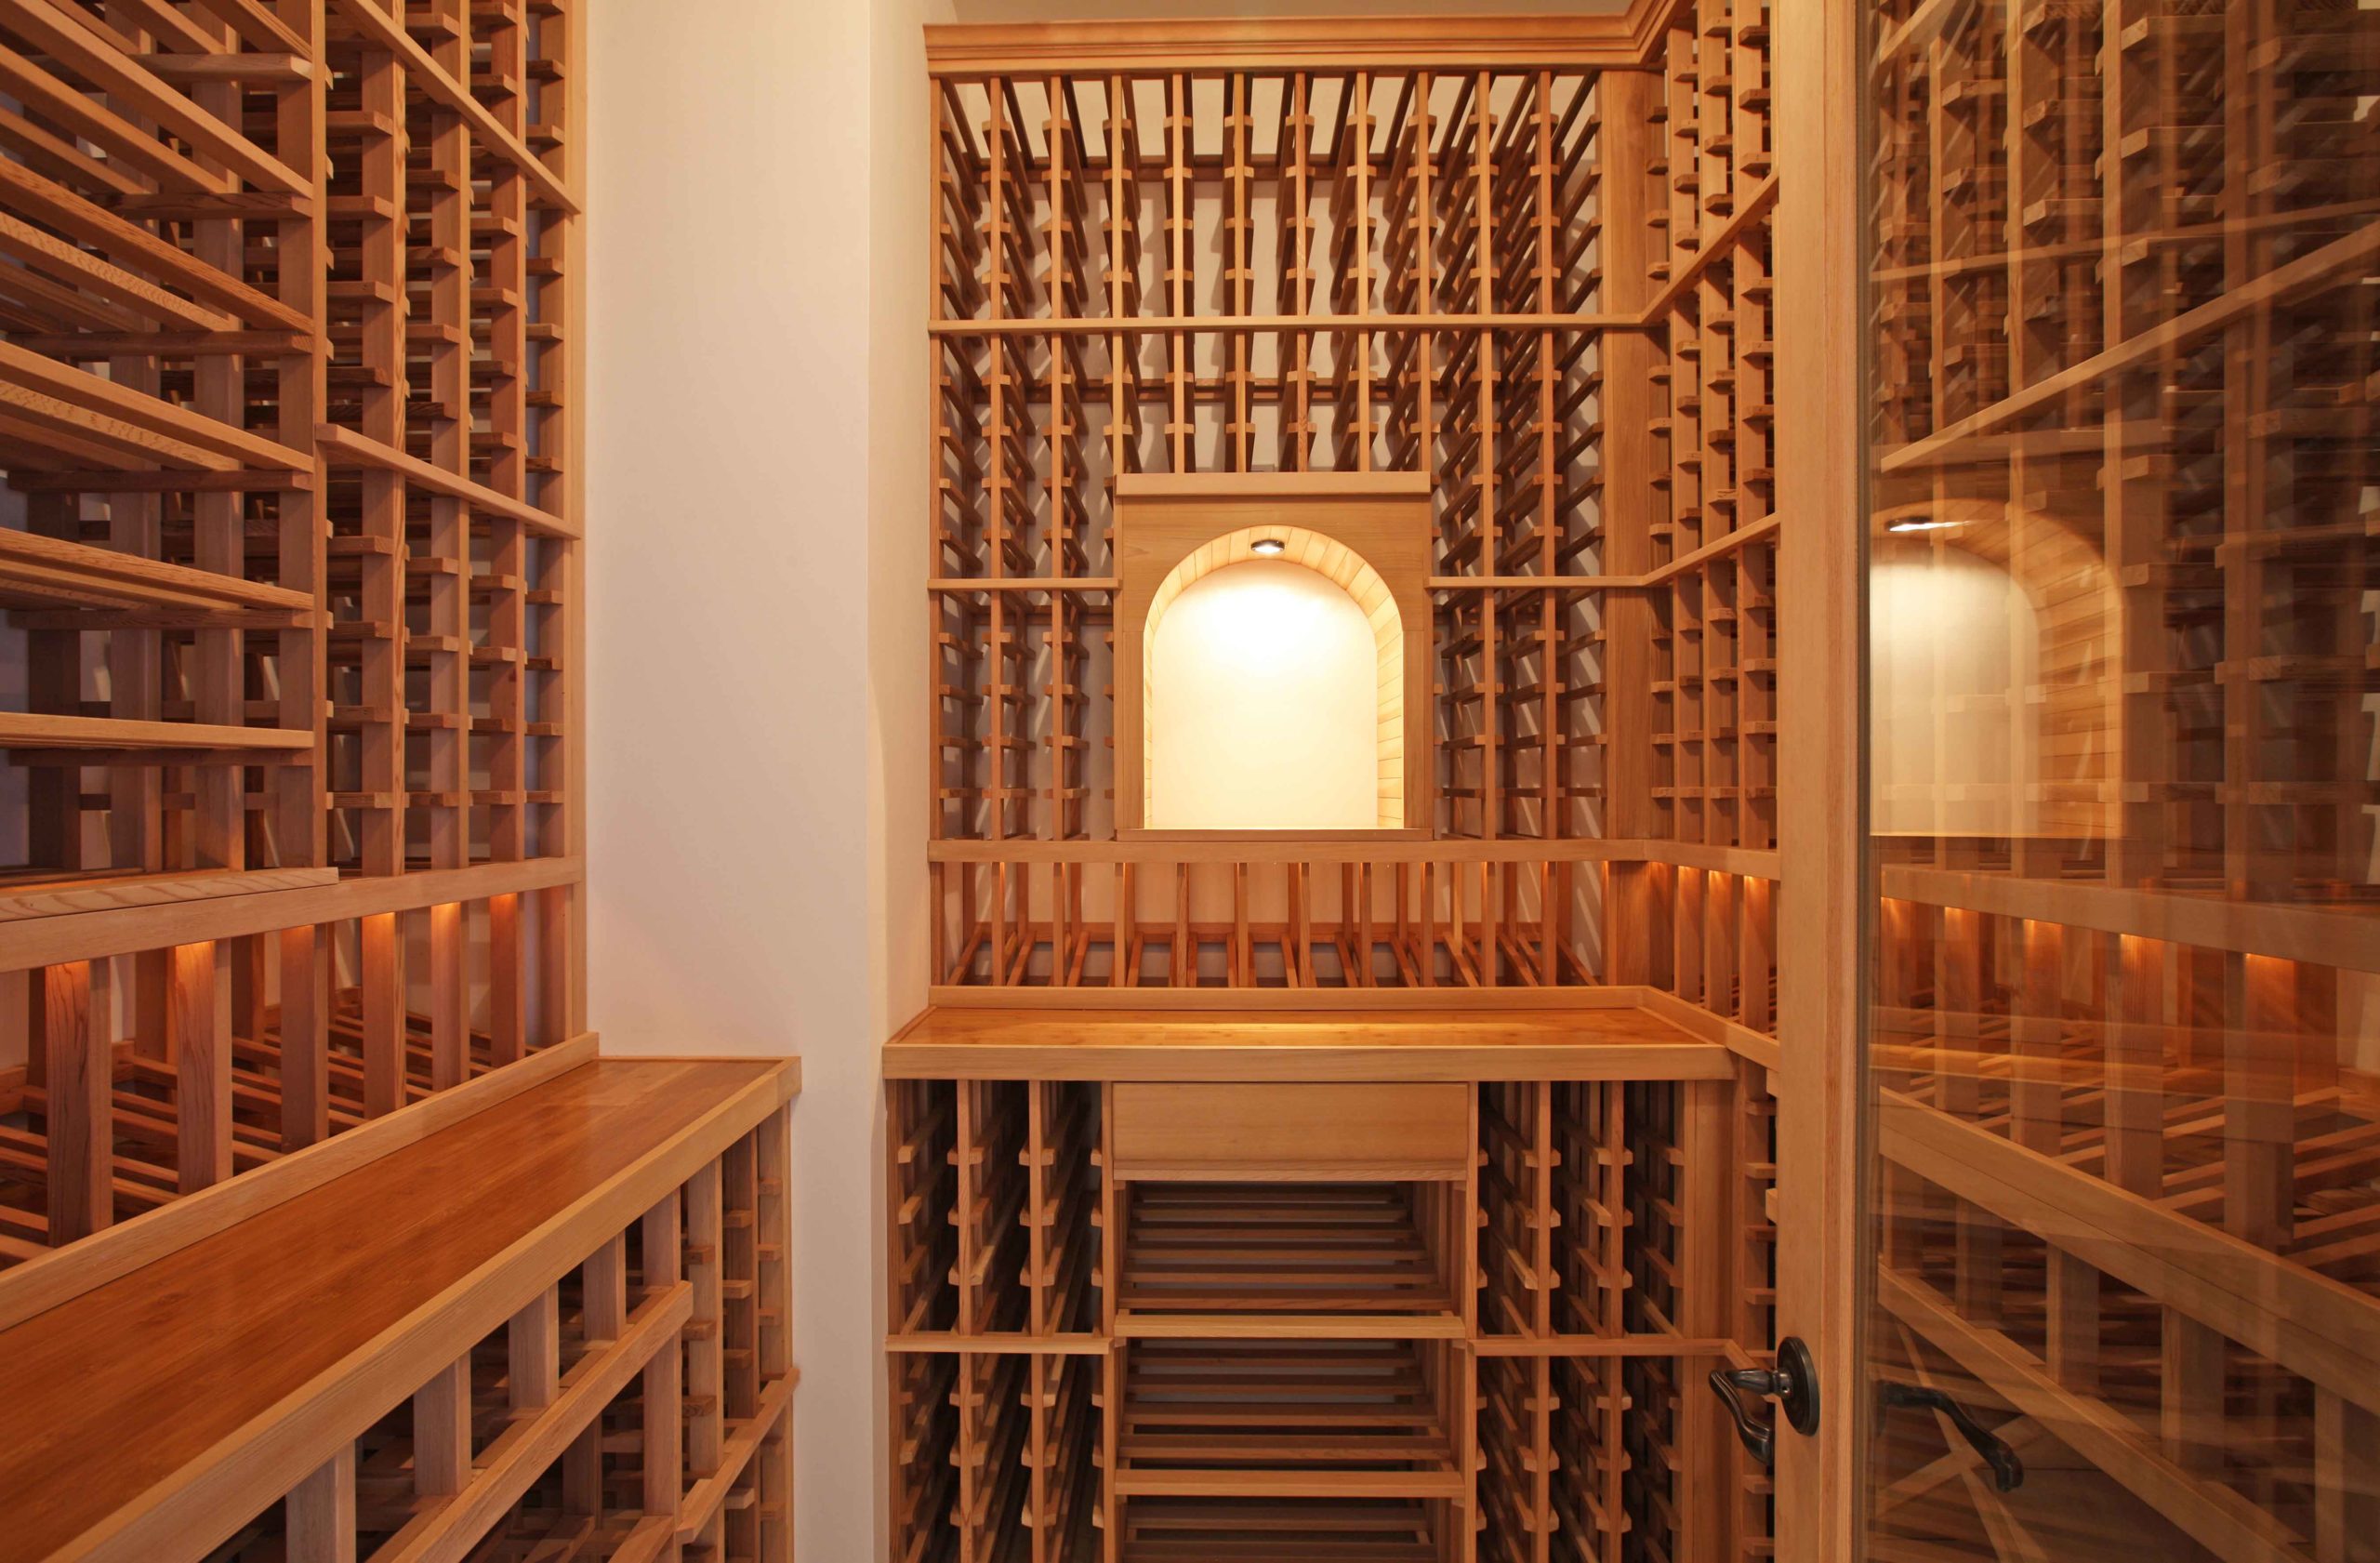 CUSTOMIZE YOUR WINE STORAGE AND STORE YOUR WINE PROPERLY AT HOME